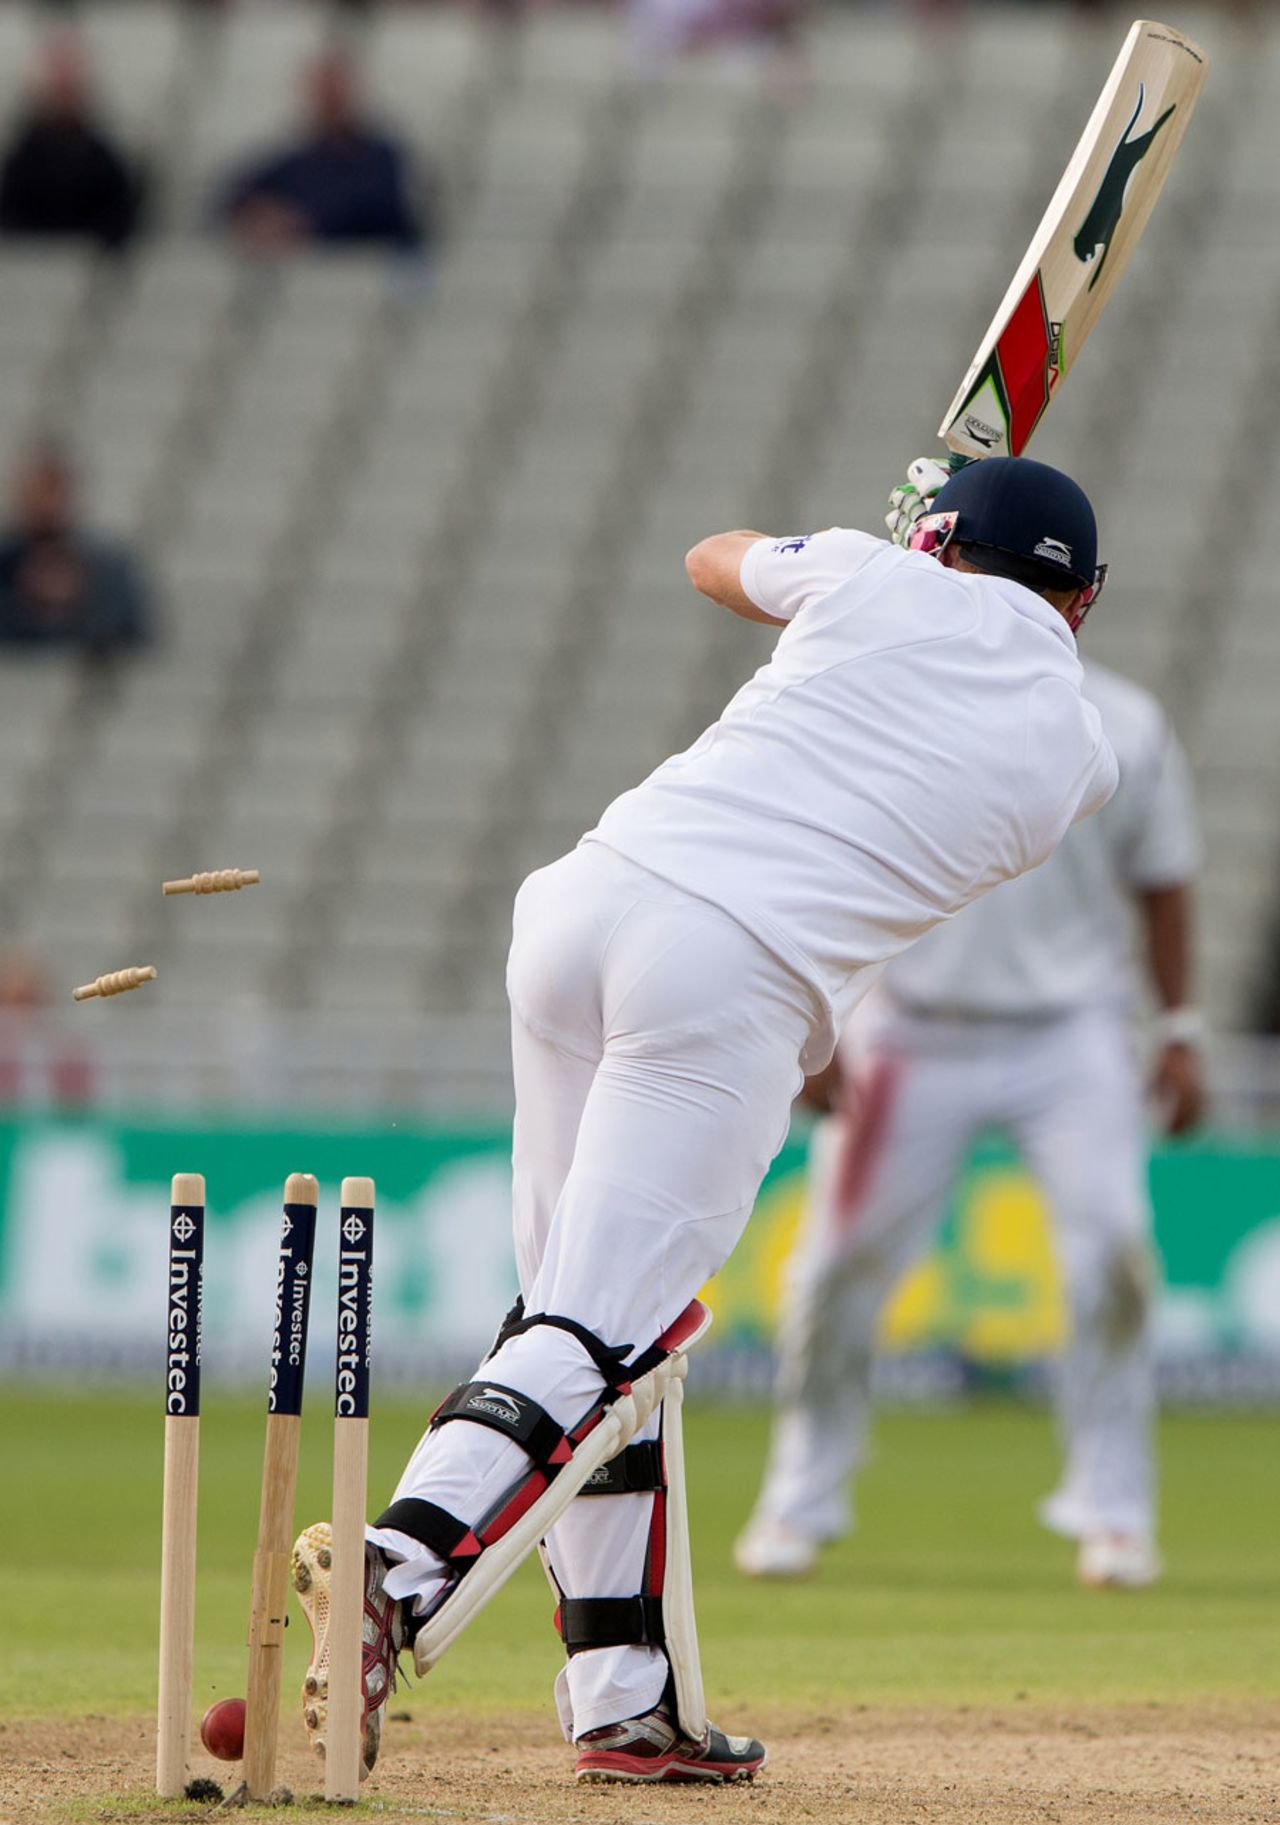 Jonny Bairstow is bowled by Tino Best, England v West Indies, 3rd Test, Edgbaston, 4th day, June 10, 2012